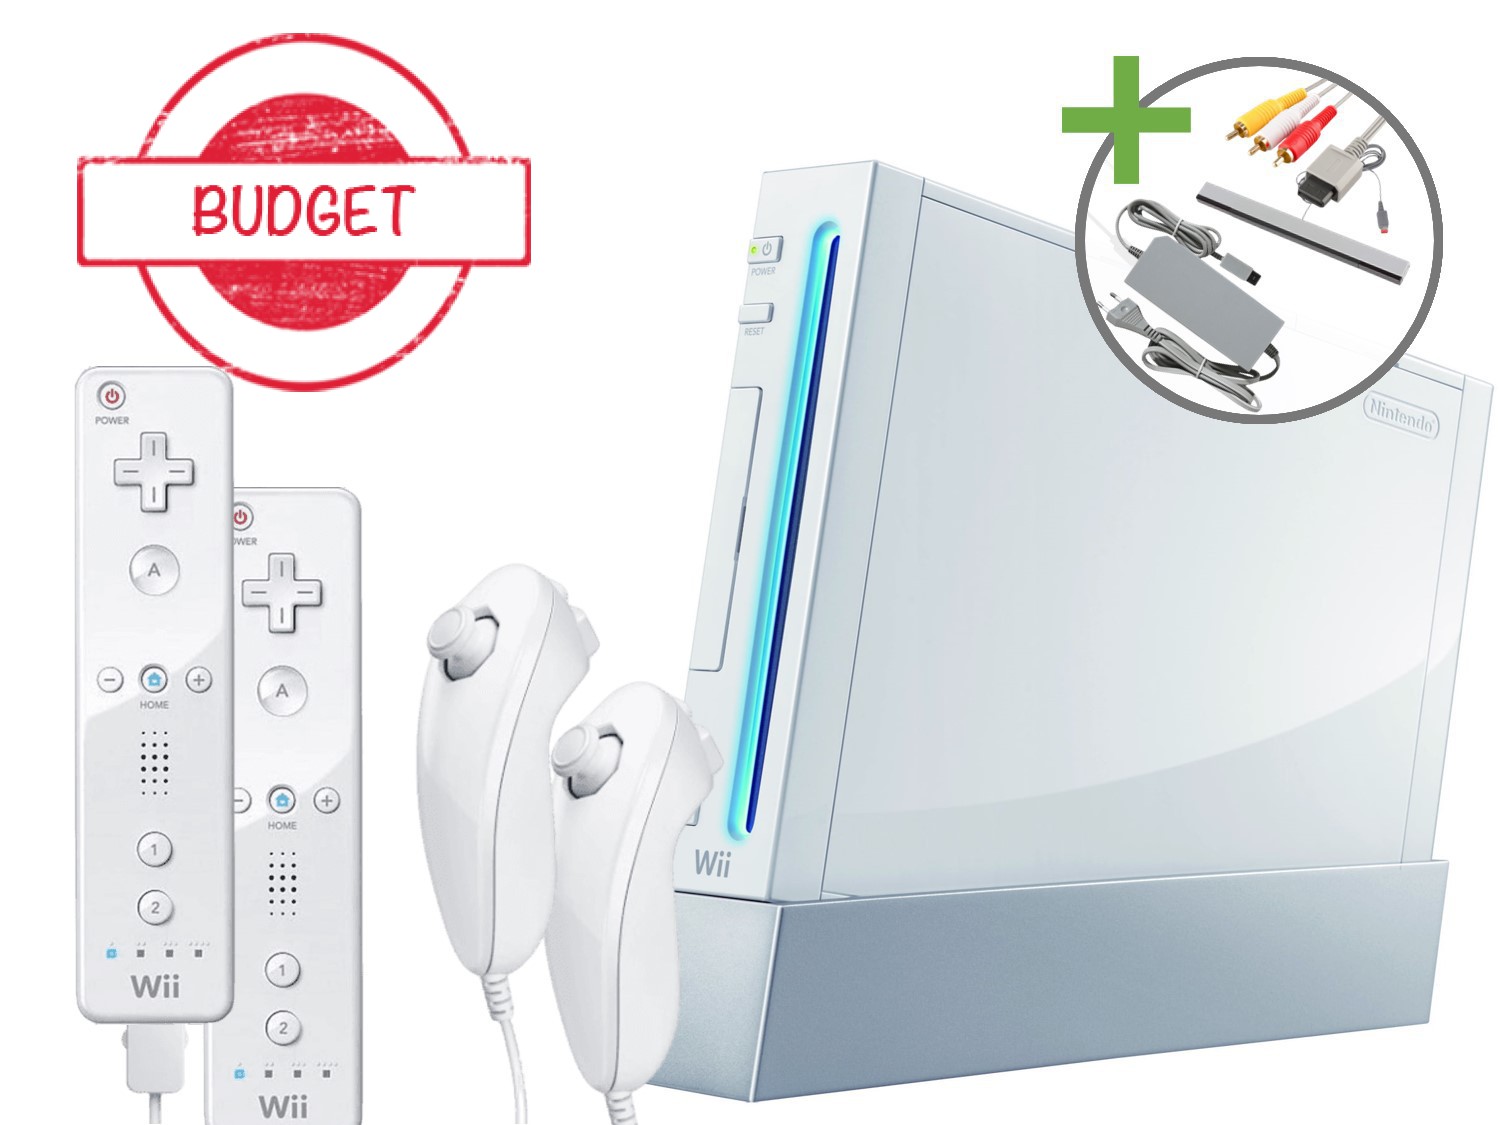 Nintendo Wii Starter Pack - Two Player Edition - Budget Kopen | Wii Hardware